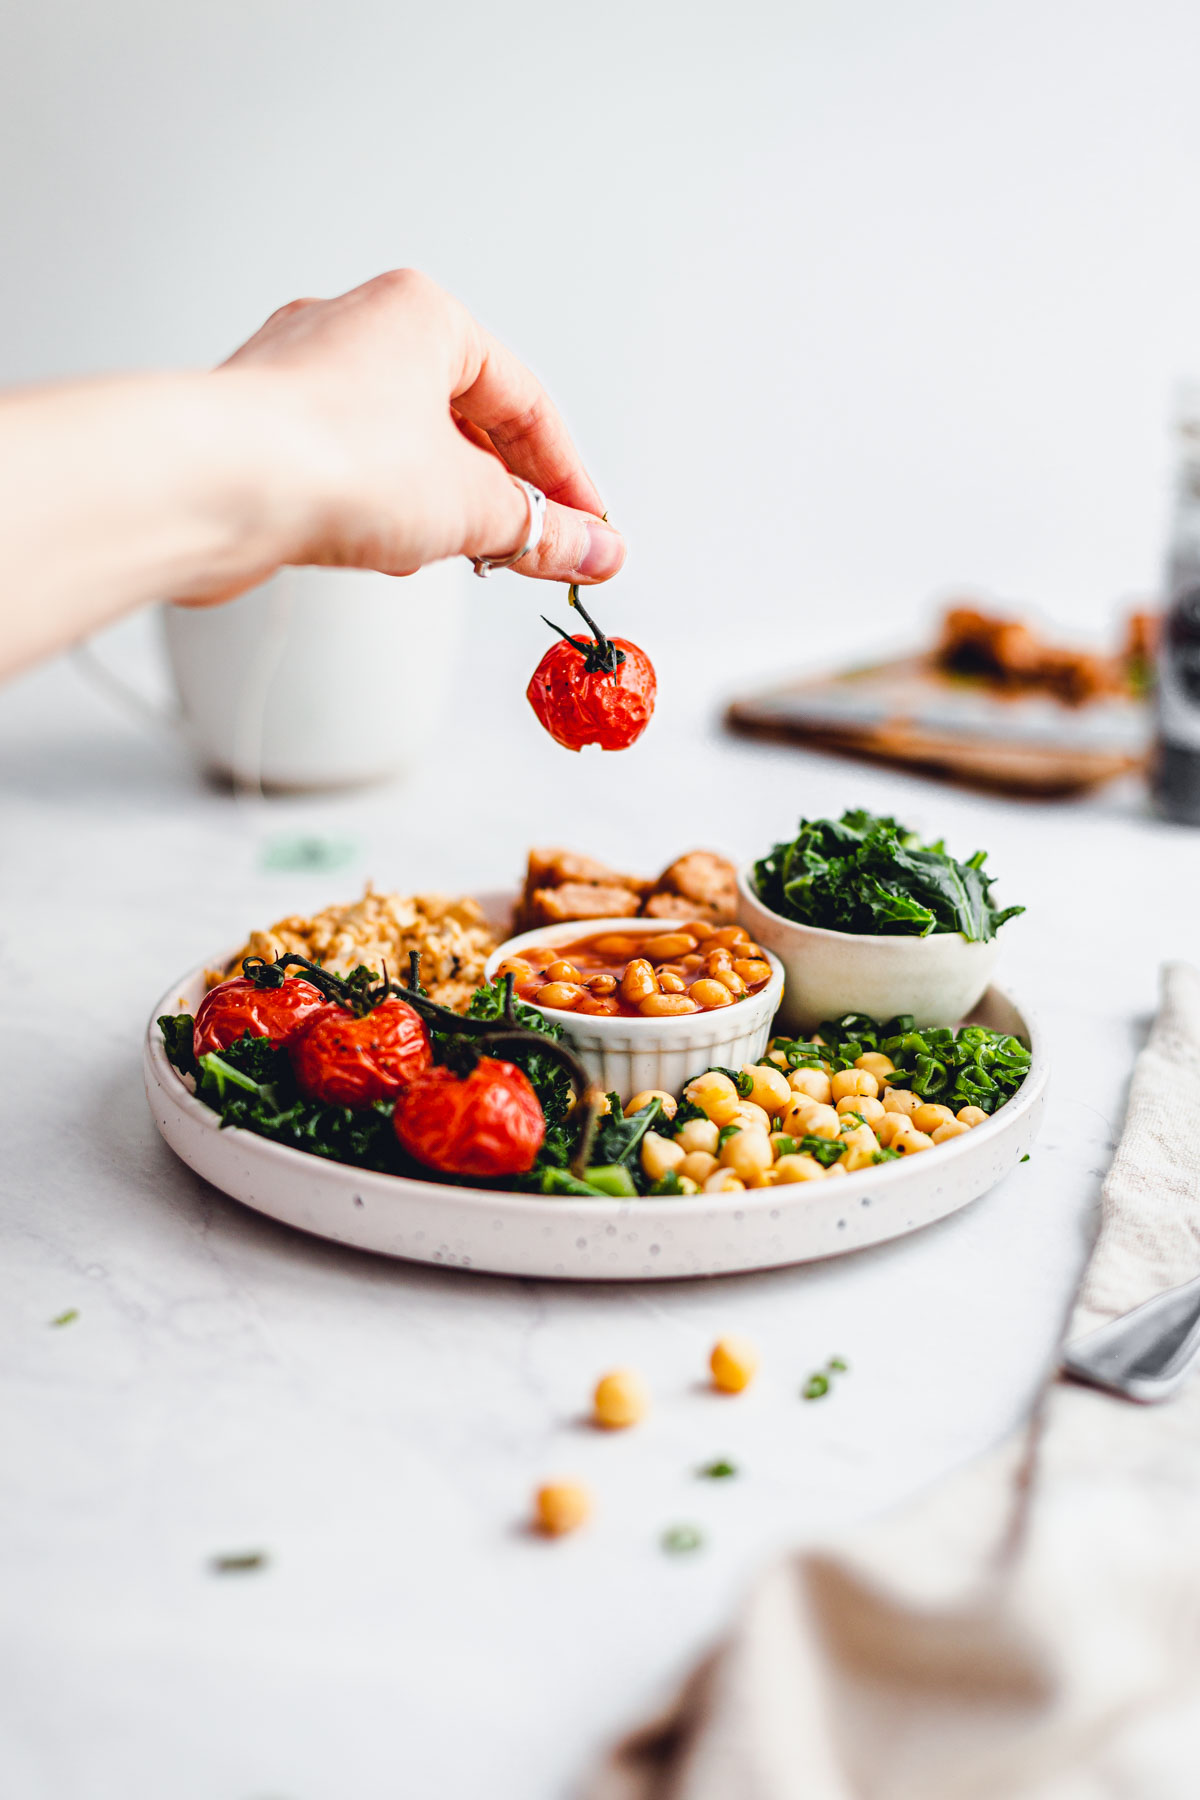 A hand reaching out to place a cherry tomato on a plate filled with vegan English breakfast.